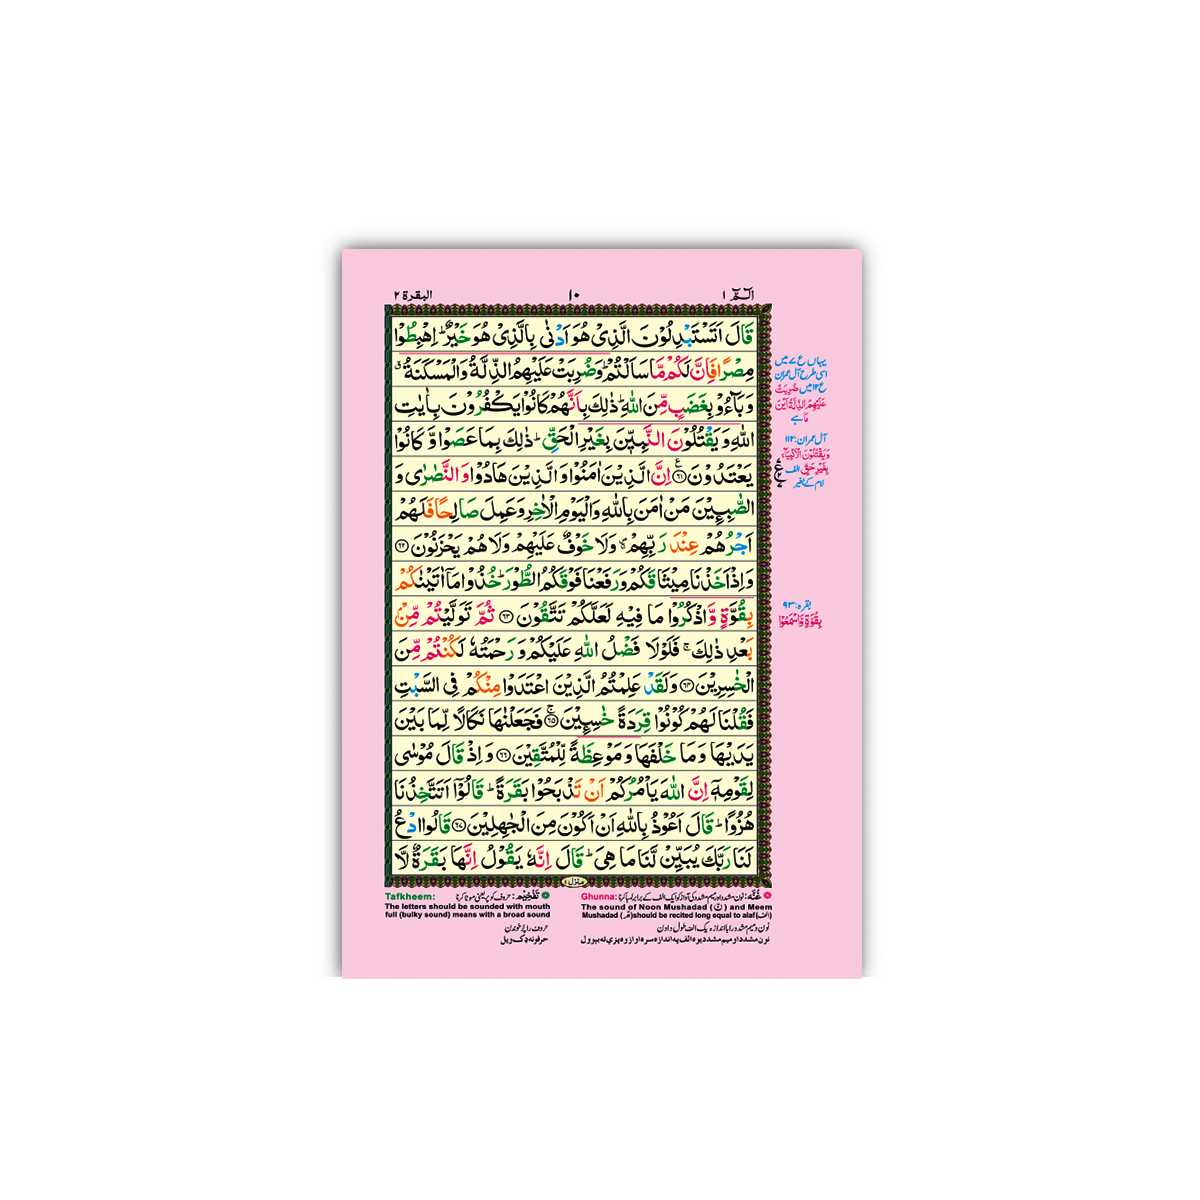 [876/5P] Five Para Set In 16 Lines With Tajweed Rules (Without Translation)